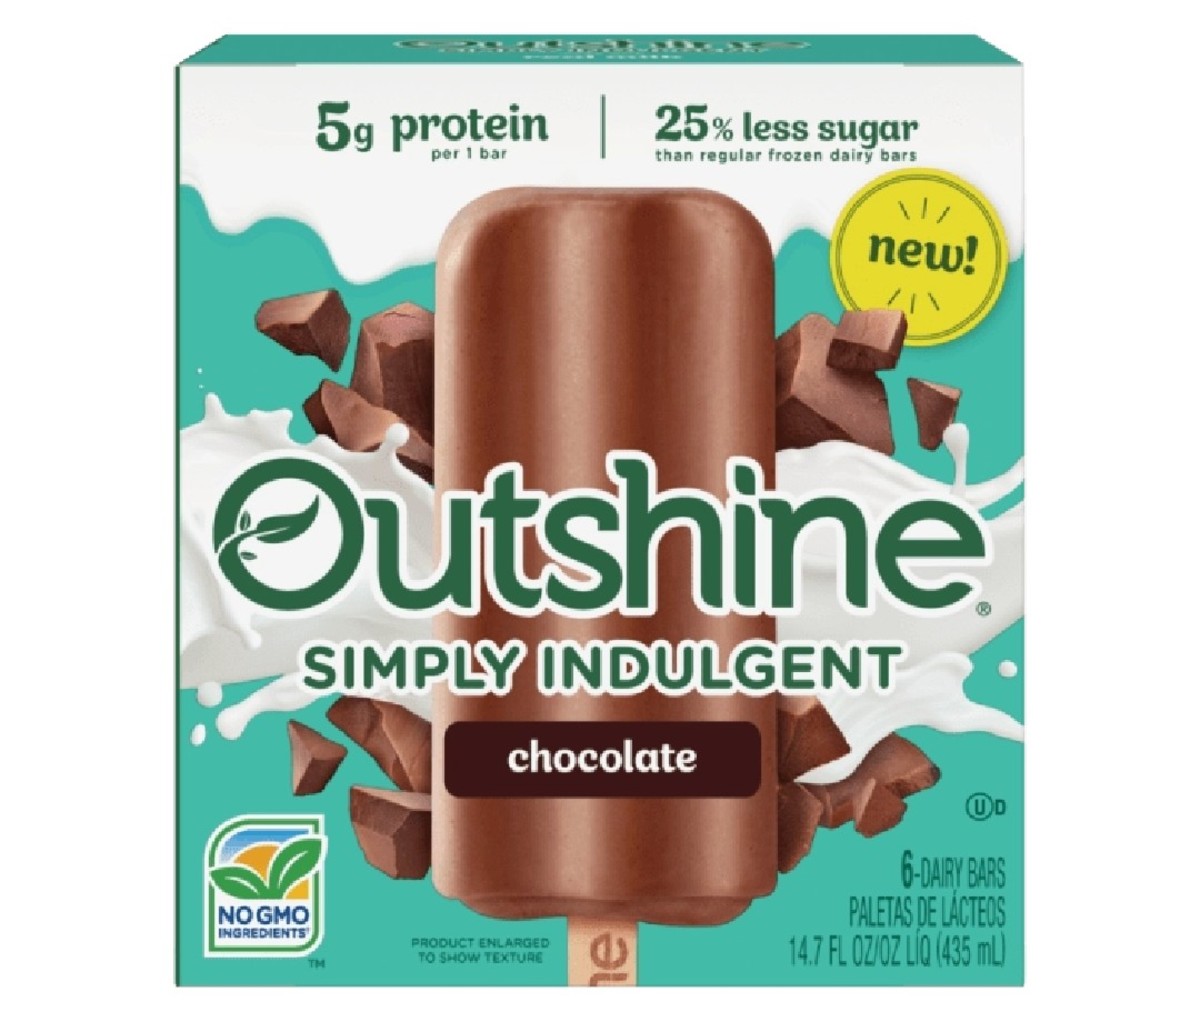 Outshine Fruit Bars are made with real fruit, no GMO ingredients, no high fructose corn syrup, and no artificial colors or flavors. The bars contain a simple ingredient list with a nutrition label featuring words you can pronounce and they take pride in making feel-good treats for you to enjoy all summer.